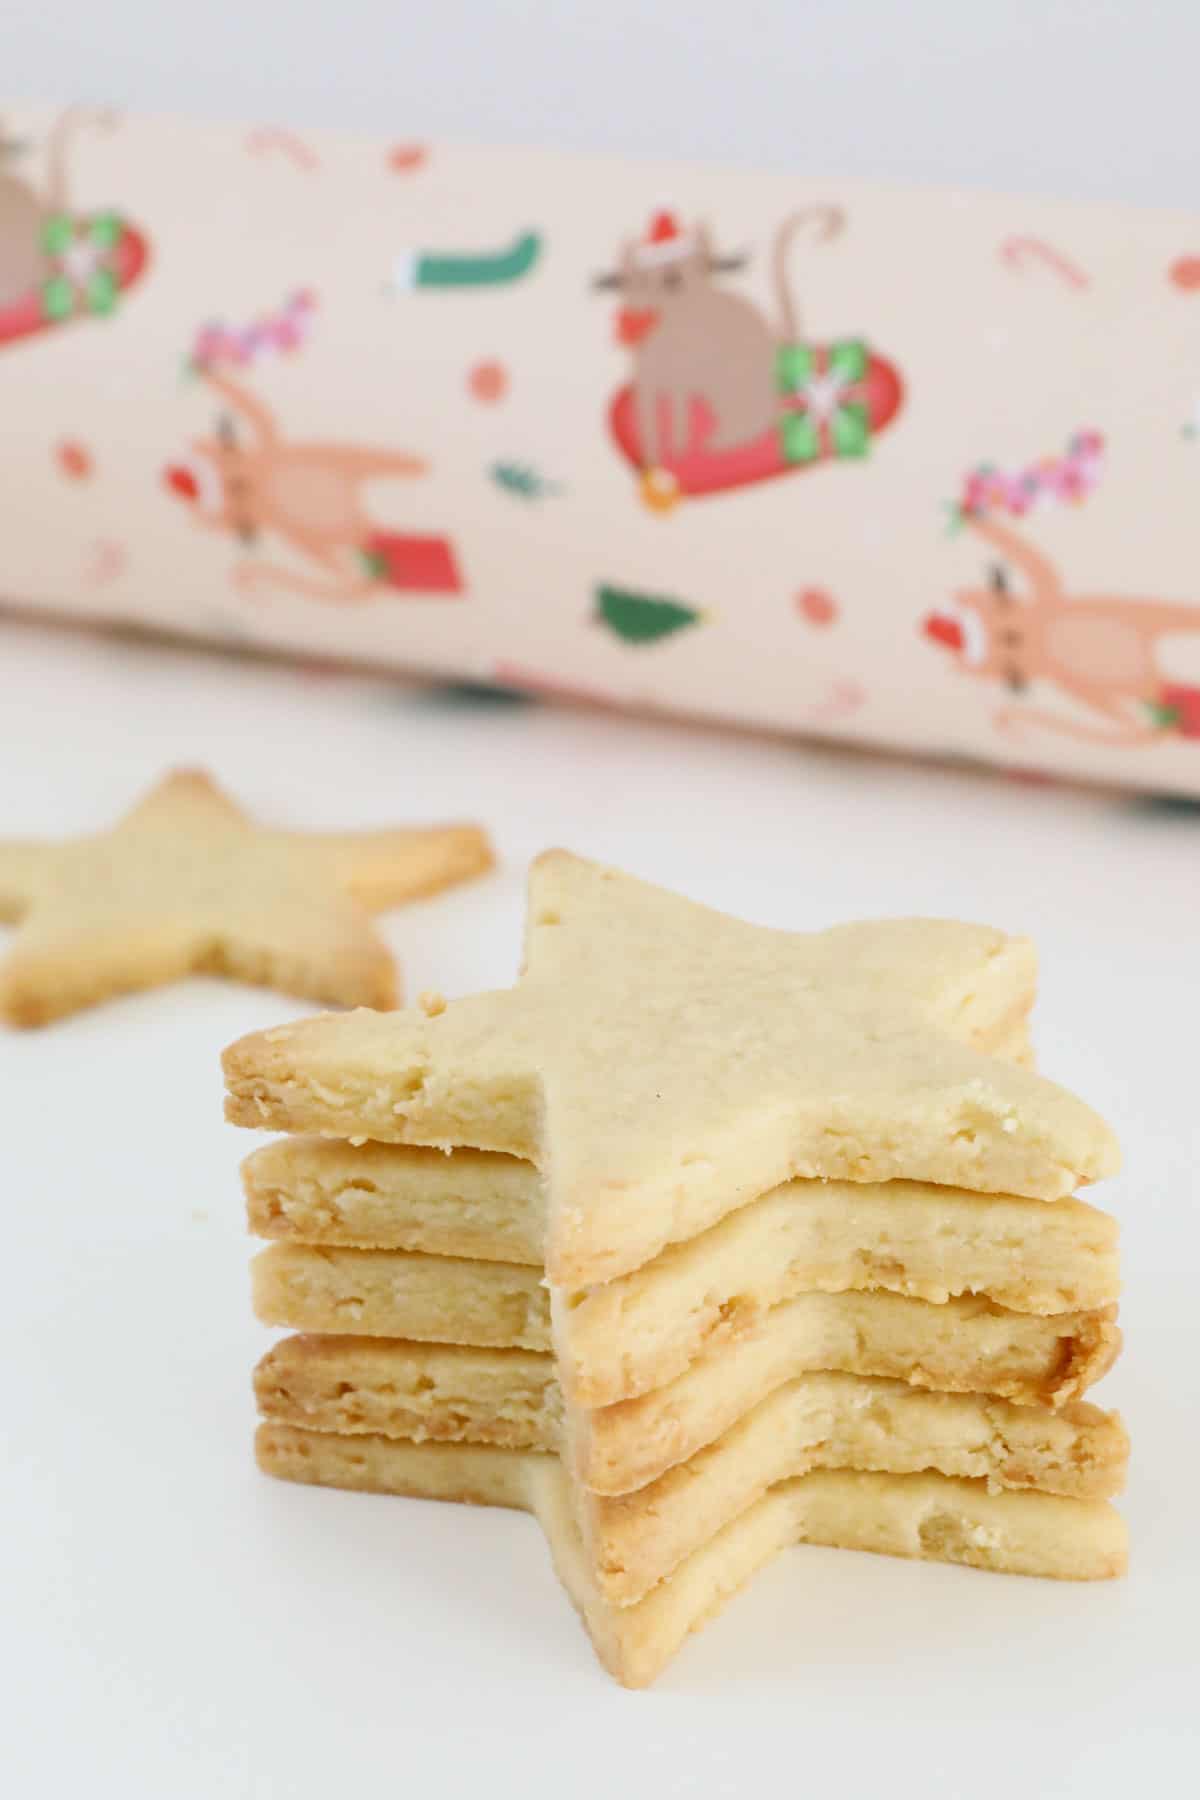 Star cookies with almonds.